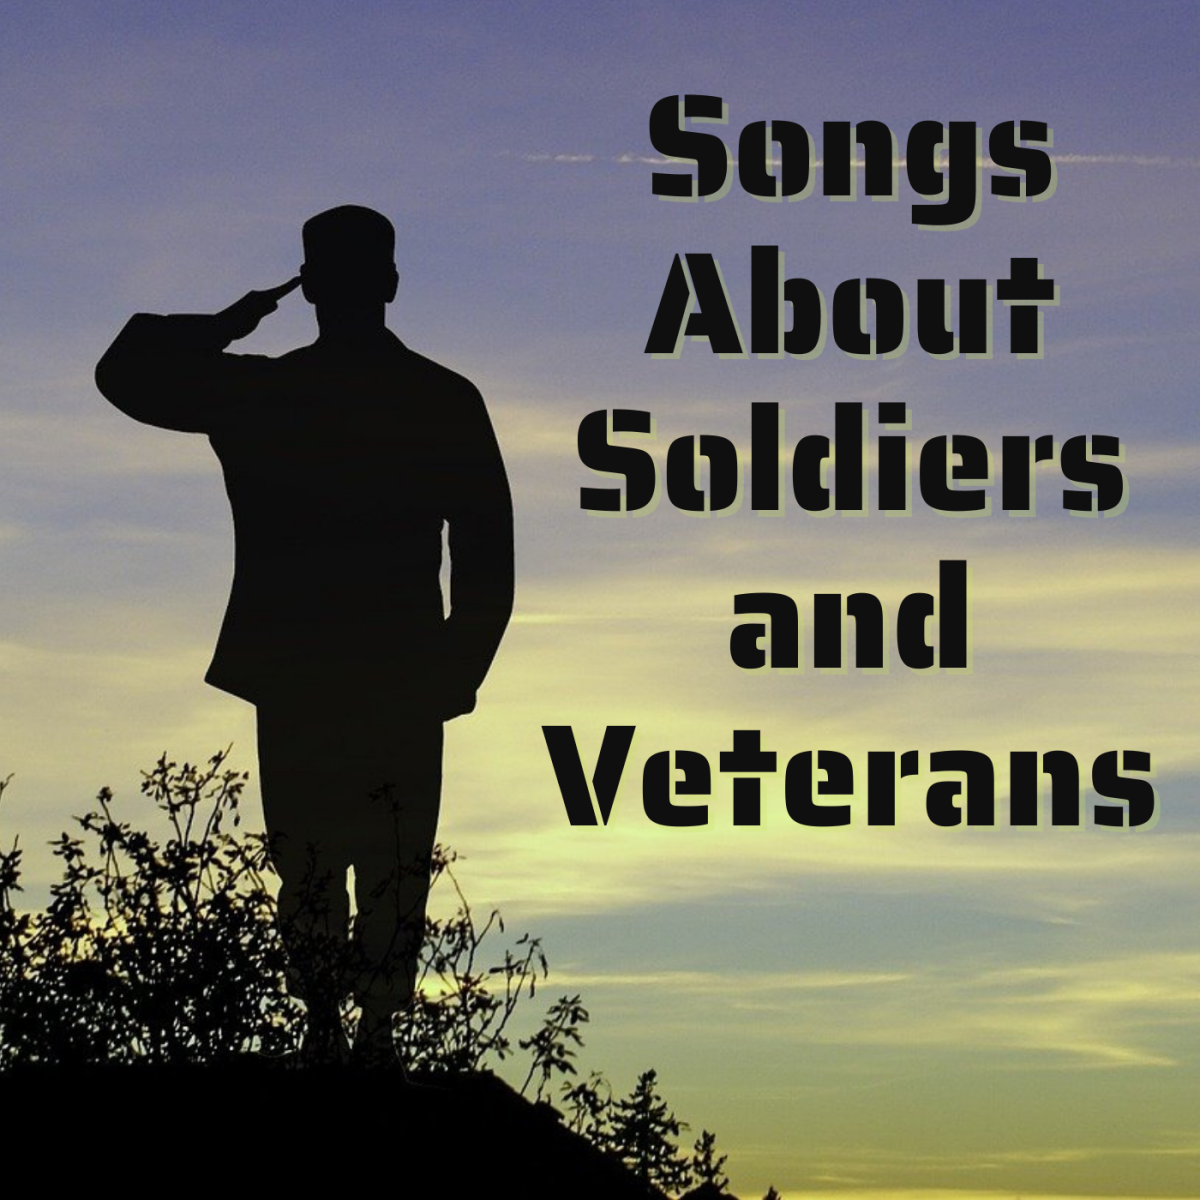 Make a playlist about soldiers and veterans to honor those who protect your liberty. We have a long list of pop, rock, metal, and country songs to get you started.